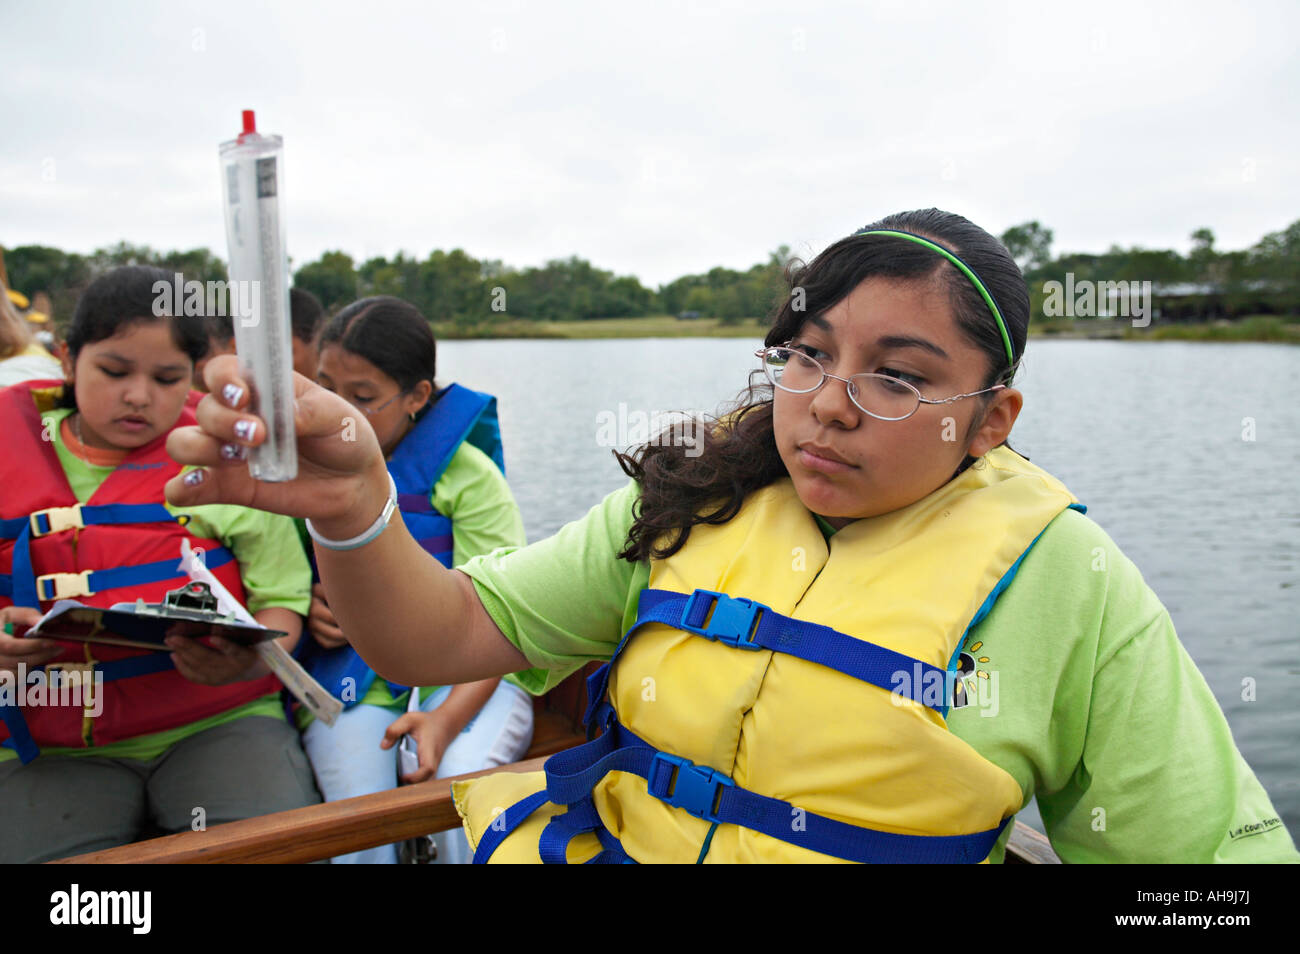 PRESERVES Libertyville Illinois Girl used wind meter students conduct water quality tests in lake ScienceFirst Stock Photo